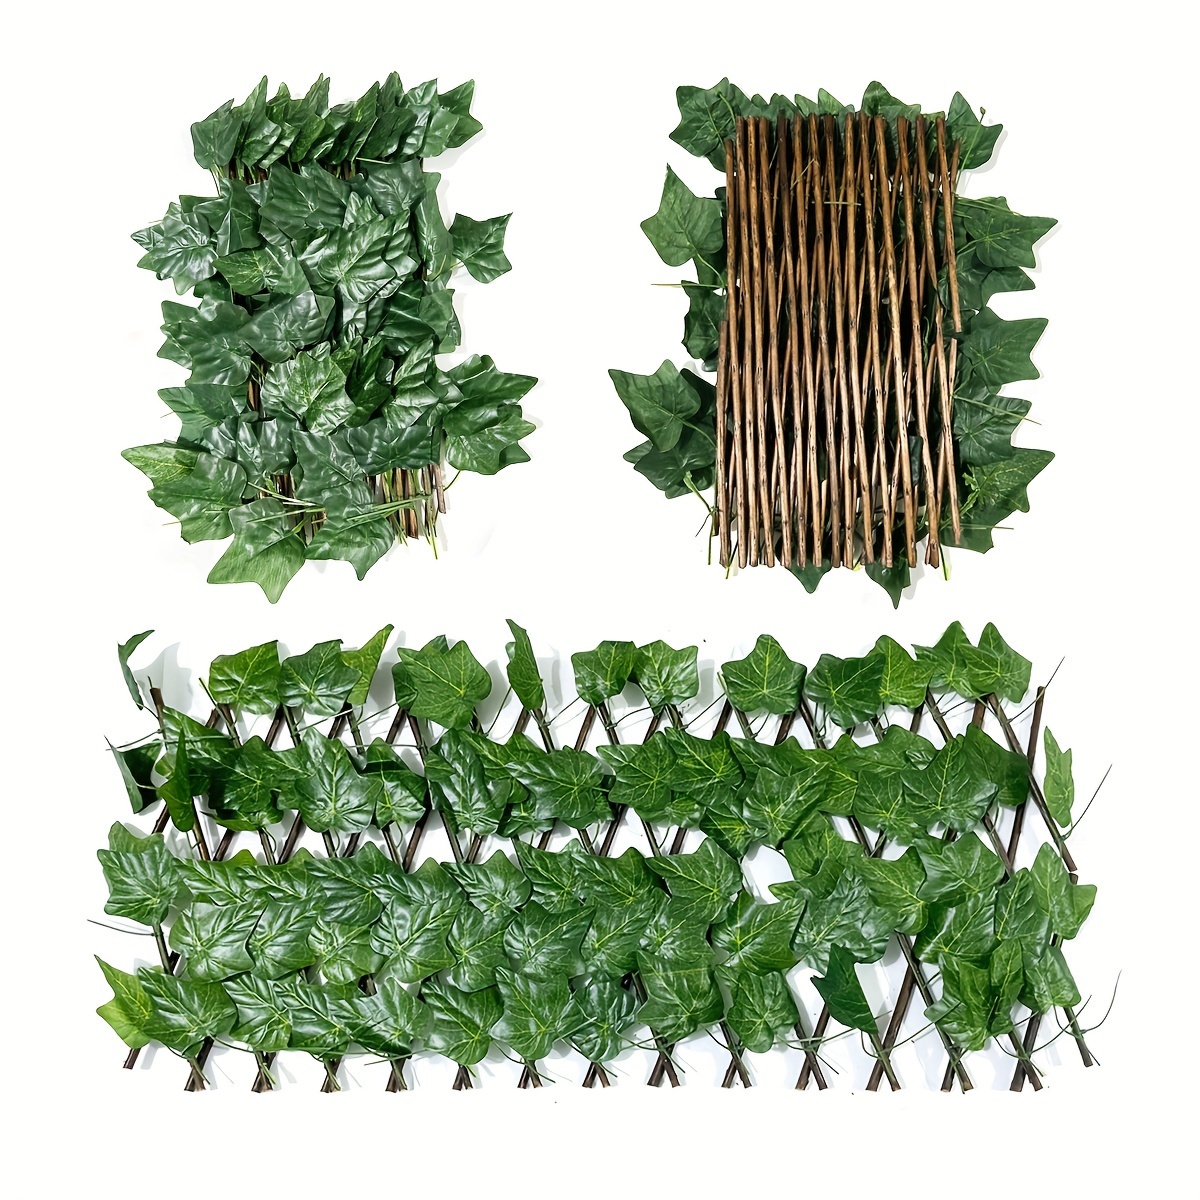 

1pc Expanding Trellis Fence Retractable Fence, Artificial Garden Plant Fence Uv Protected Vine Privacy Fence Faux Ivy Fencing Panel Wall Screen For Backyard Home Decor Greenery Walls